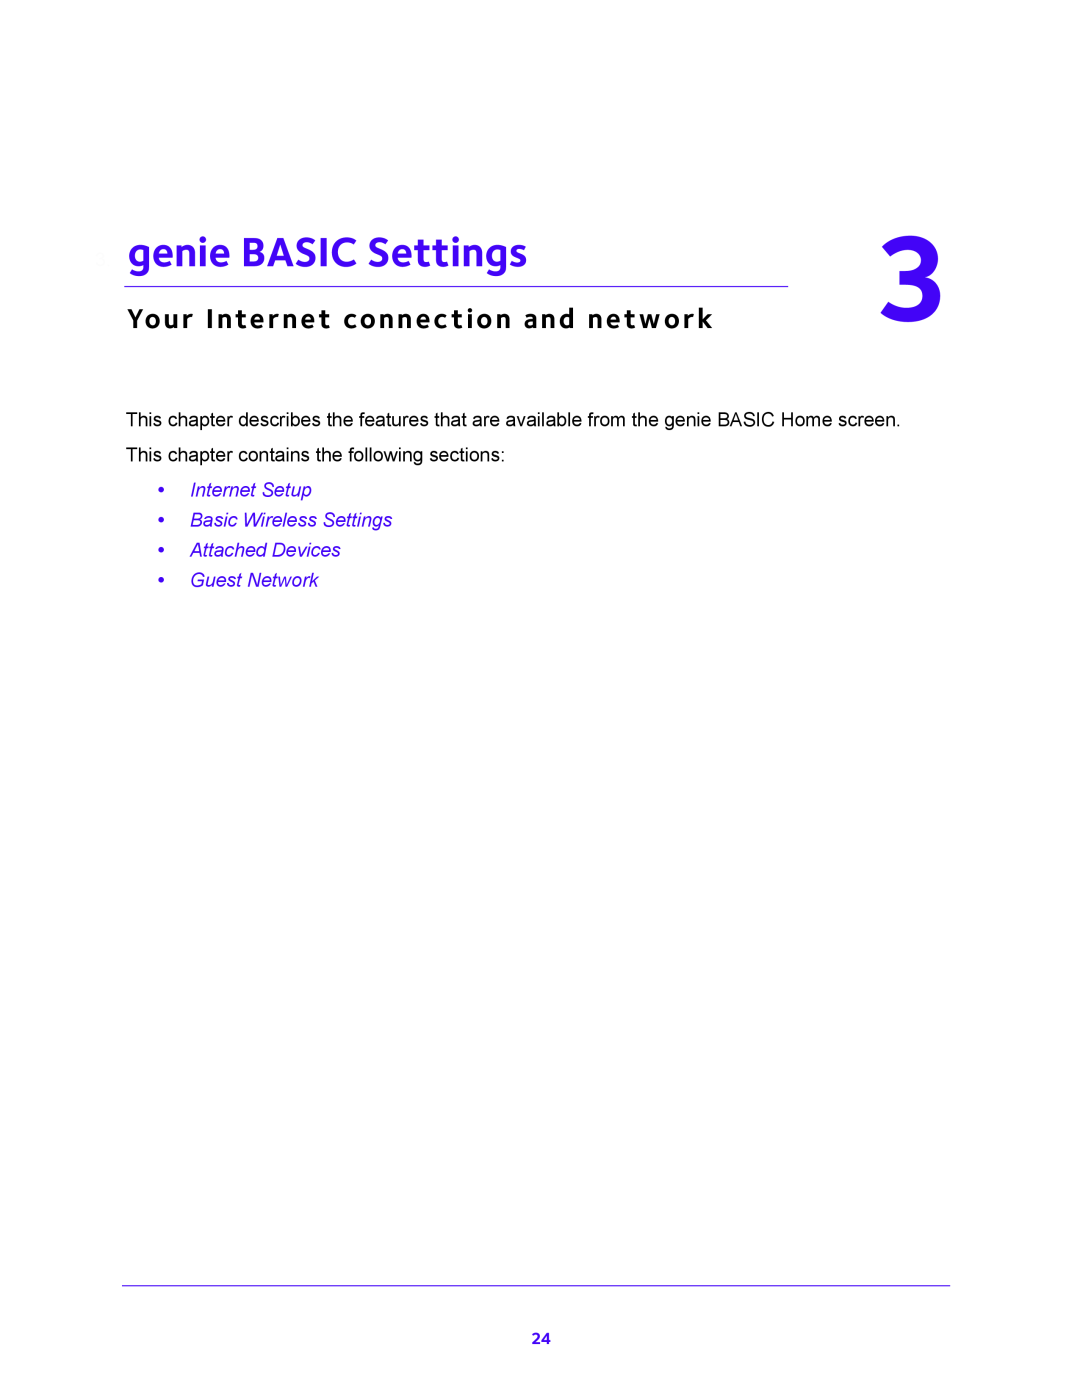 NETGEAR JNR1010V2 user manual genie BASIC Settings, Your Internet connection and network 